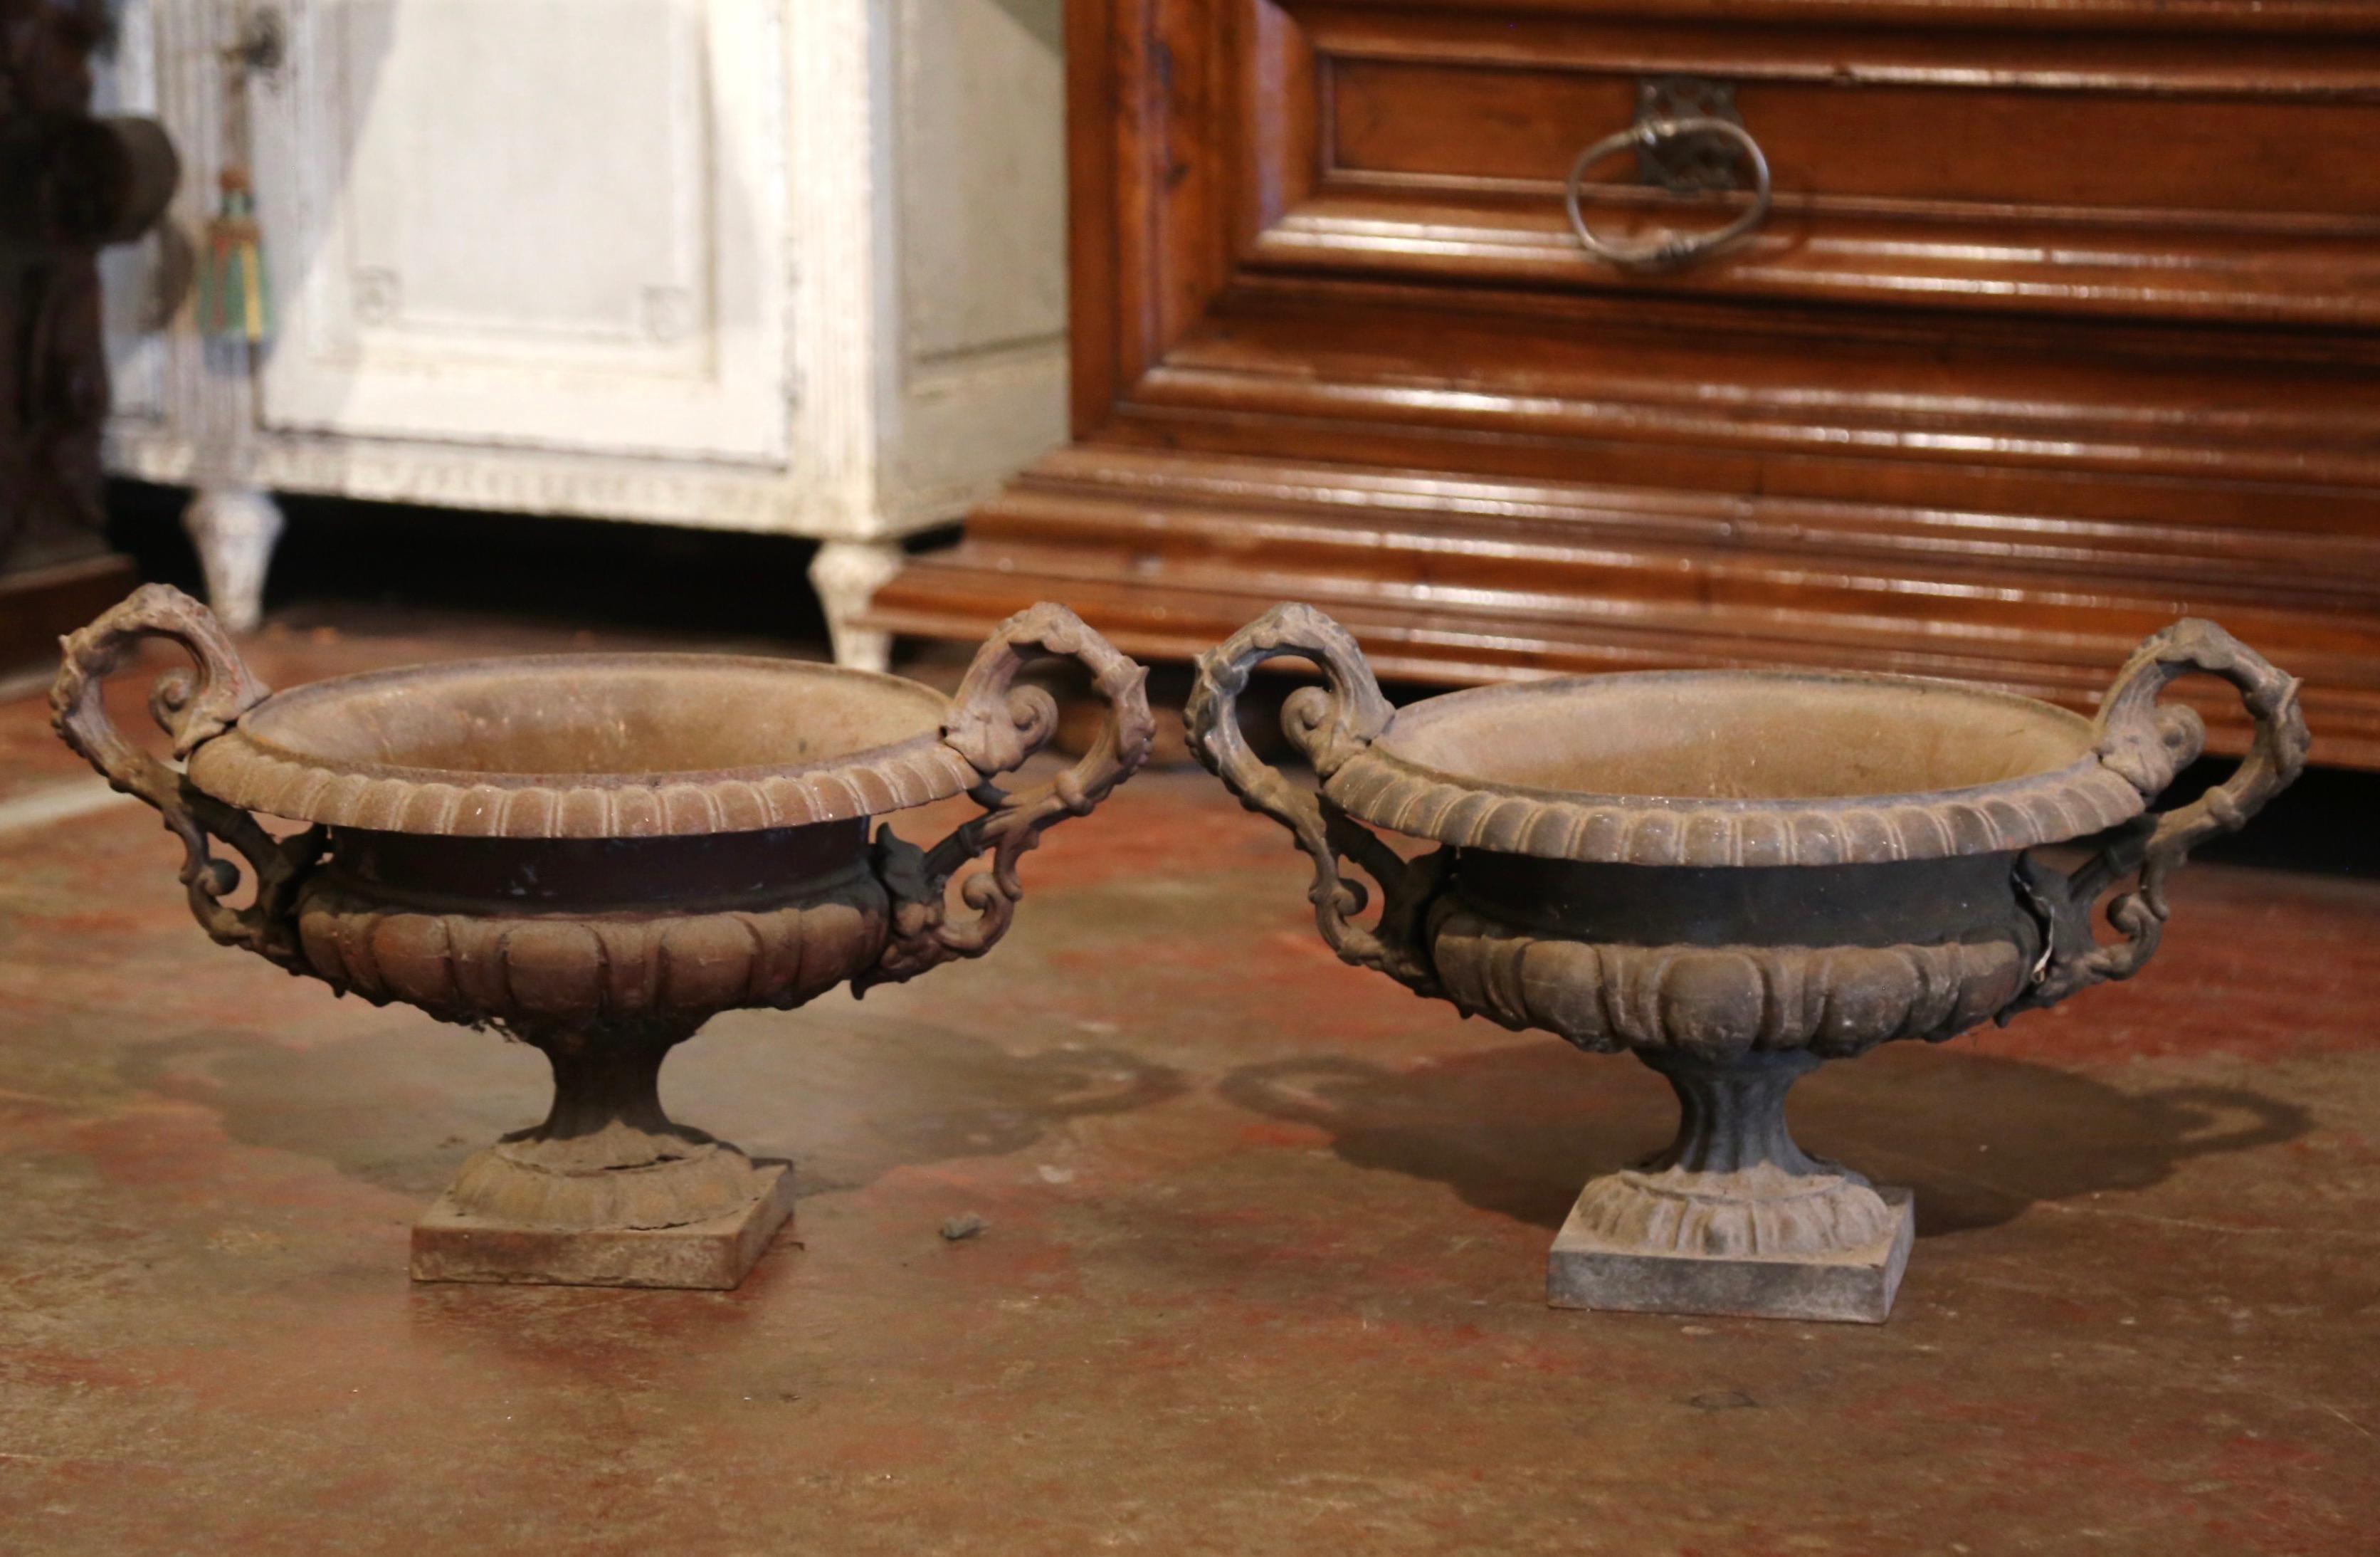 Pair of 19th Century French Neoclassical Weathered Iron Garden Urn Planters In Excellent Condition For Sale In Dallas, TX